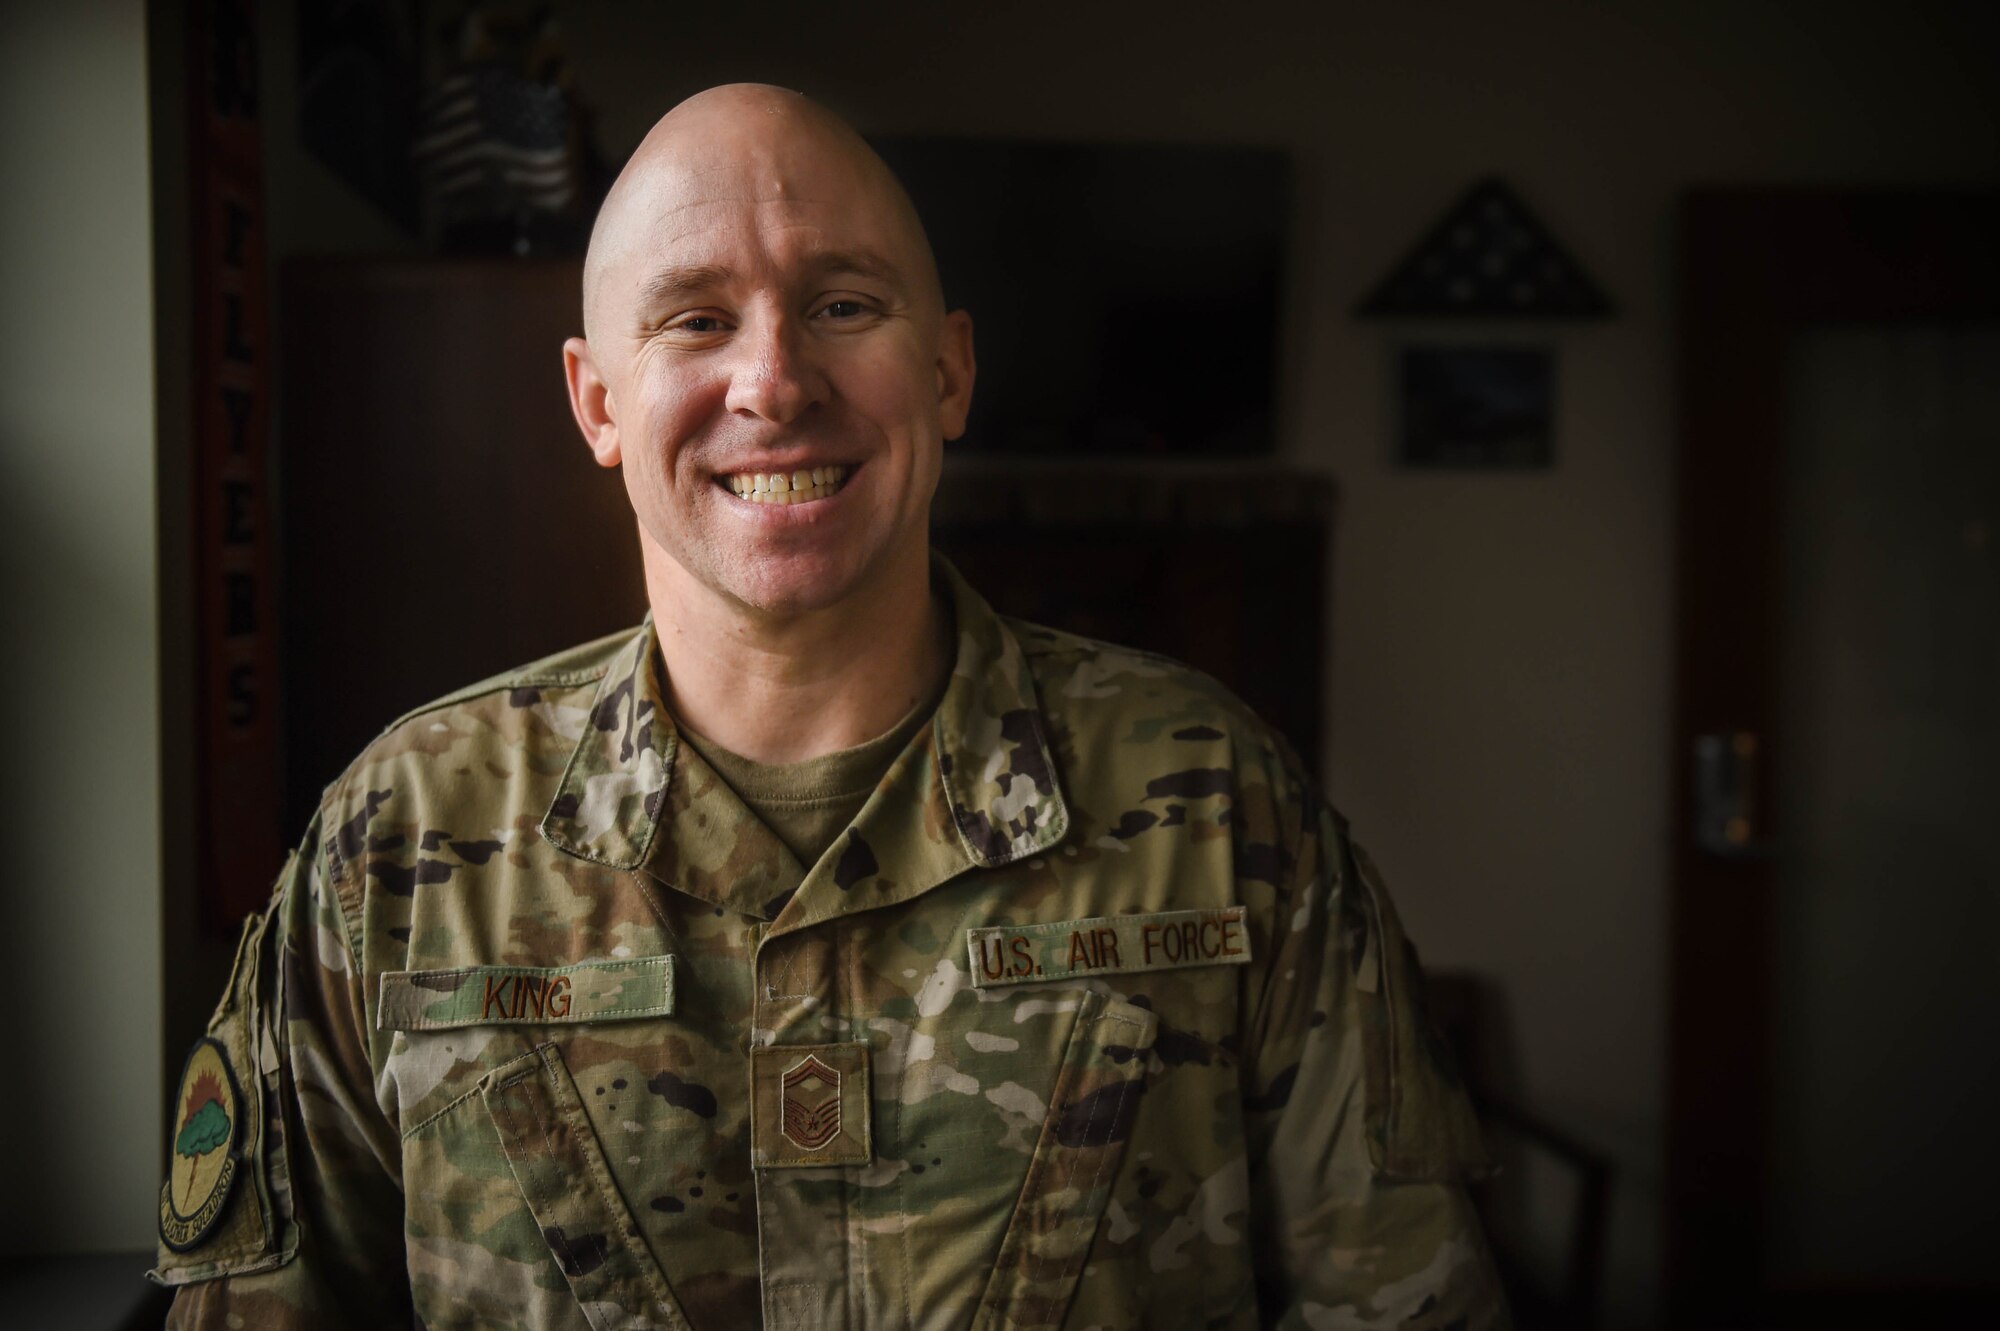 Senior Master Sgt. Fred King, 1st Weather Squadron superintendent, poses for a photo on Joint Base Lewis-McChord, Wash., Dec. 4, 2019. He was one of the nine McChord Airmen selected this year for promotion to chief master sergeant, the highest enlisted rank in the Air Force. 
“Promoting to chief master sergeant affords me the continued opportunity to serve Airmen and affect changes that improve when needed and sustain when successful.
Always take care of the people around you.  Arm them with knowledge, position them for success, and empower them. Then get out of their way and let them crush their mission.
One word: honesty.  We have to be honest with the people in our lives, to include ourselves, at all times.  We only communicate effectively if we communicate honestly, especially during difficult or challenging times.” 
(U.S. Air Force photo by Airman 1st Class Mikayla Heineck)